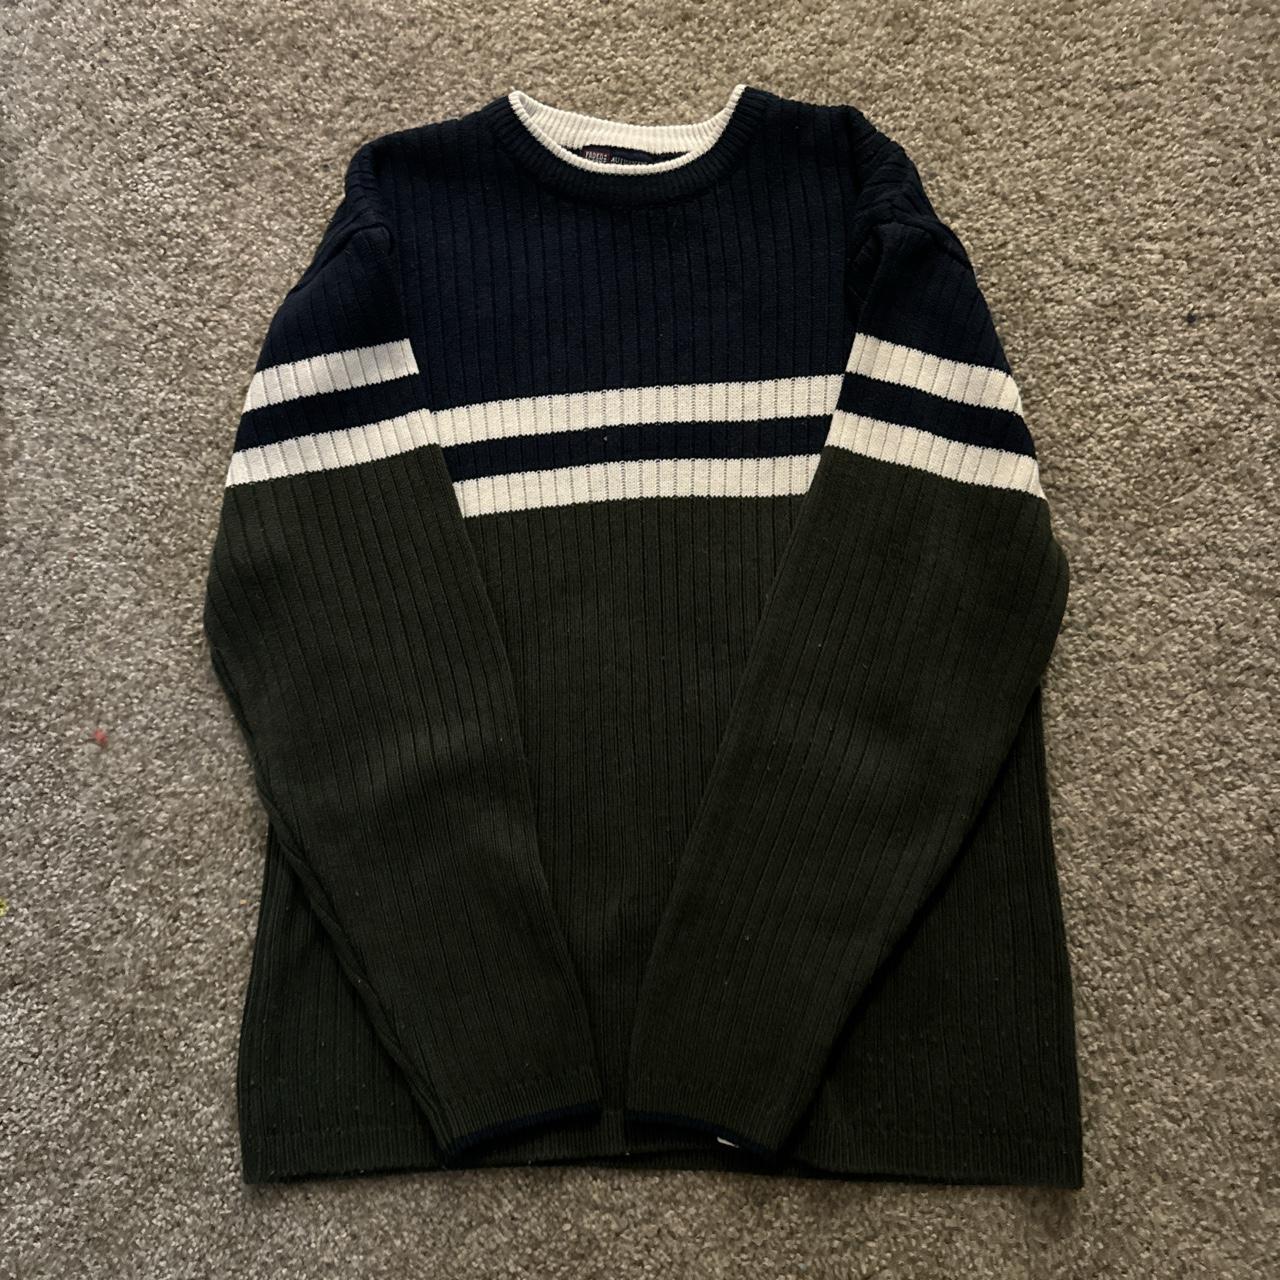 perfect condition men’s sweater size large - Depop